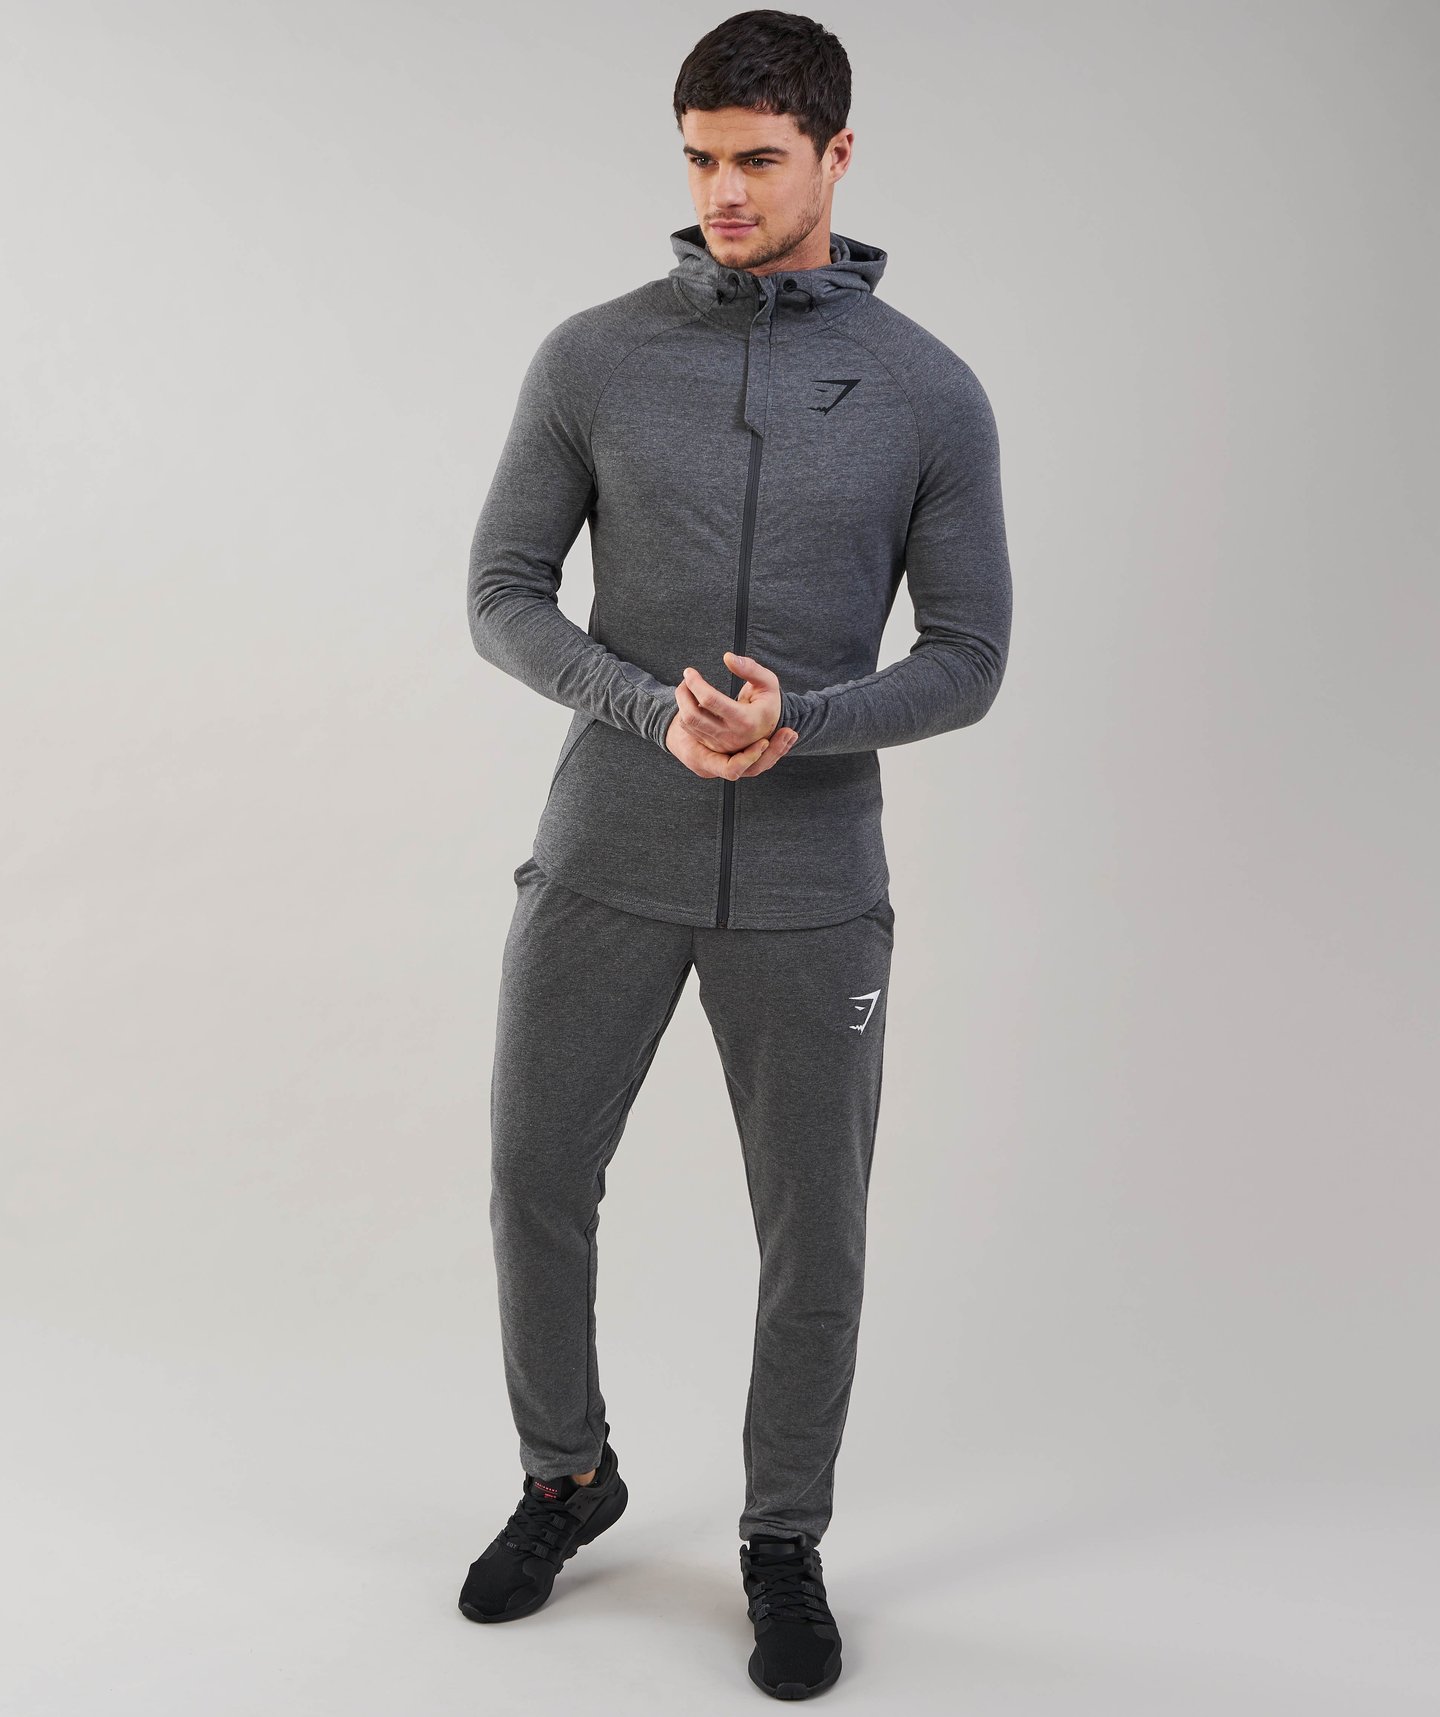 GYMSHARK FIT HOODED TOP – CHARCOAL MARL (AUTHENTIC) – Brofit